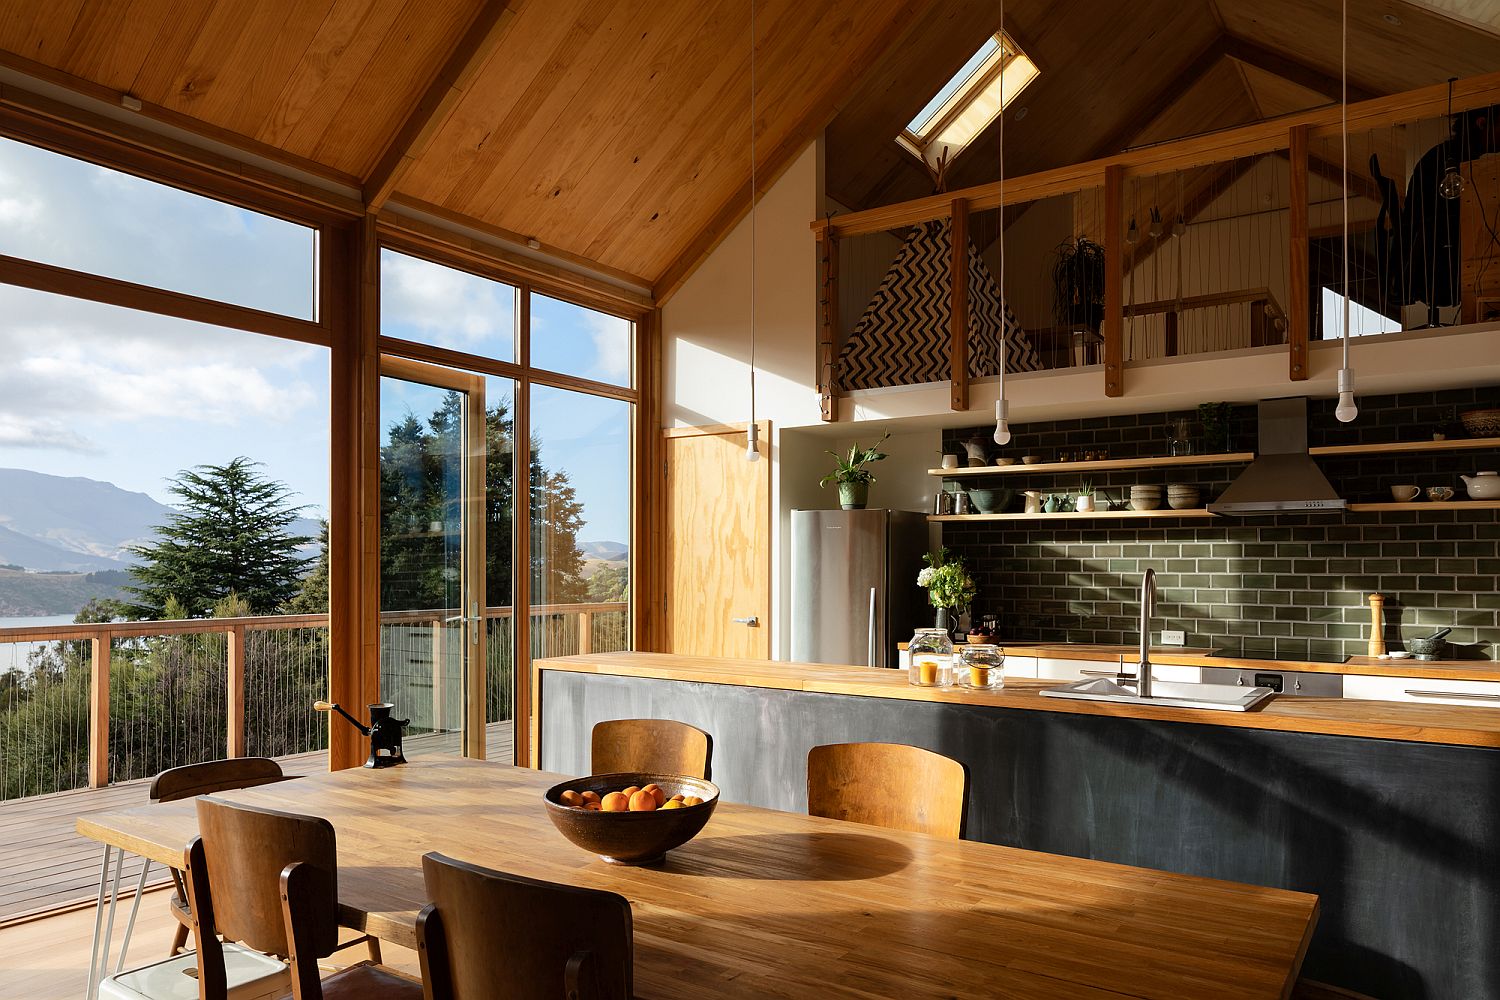 Kitchen-and-dining-area-of-the-New-Zealand-home-with-lovely-mountain-views